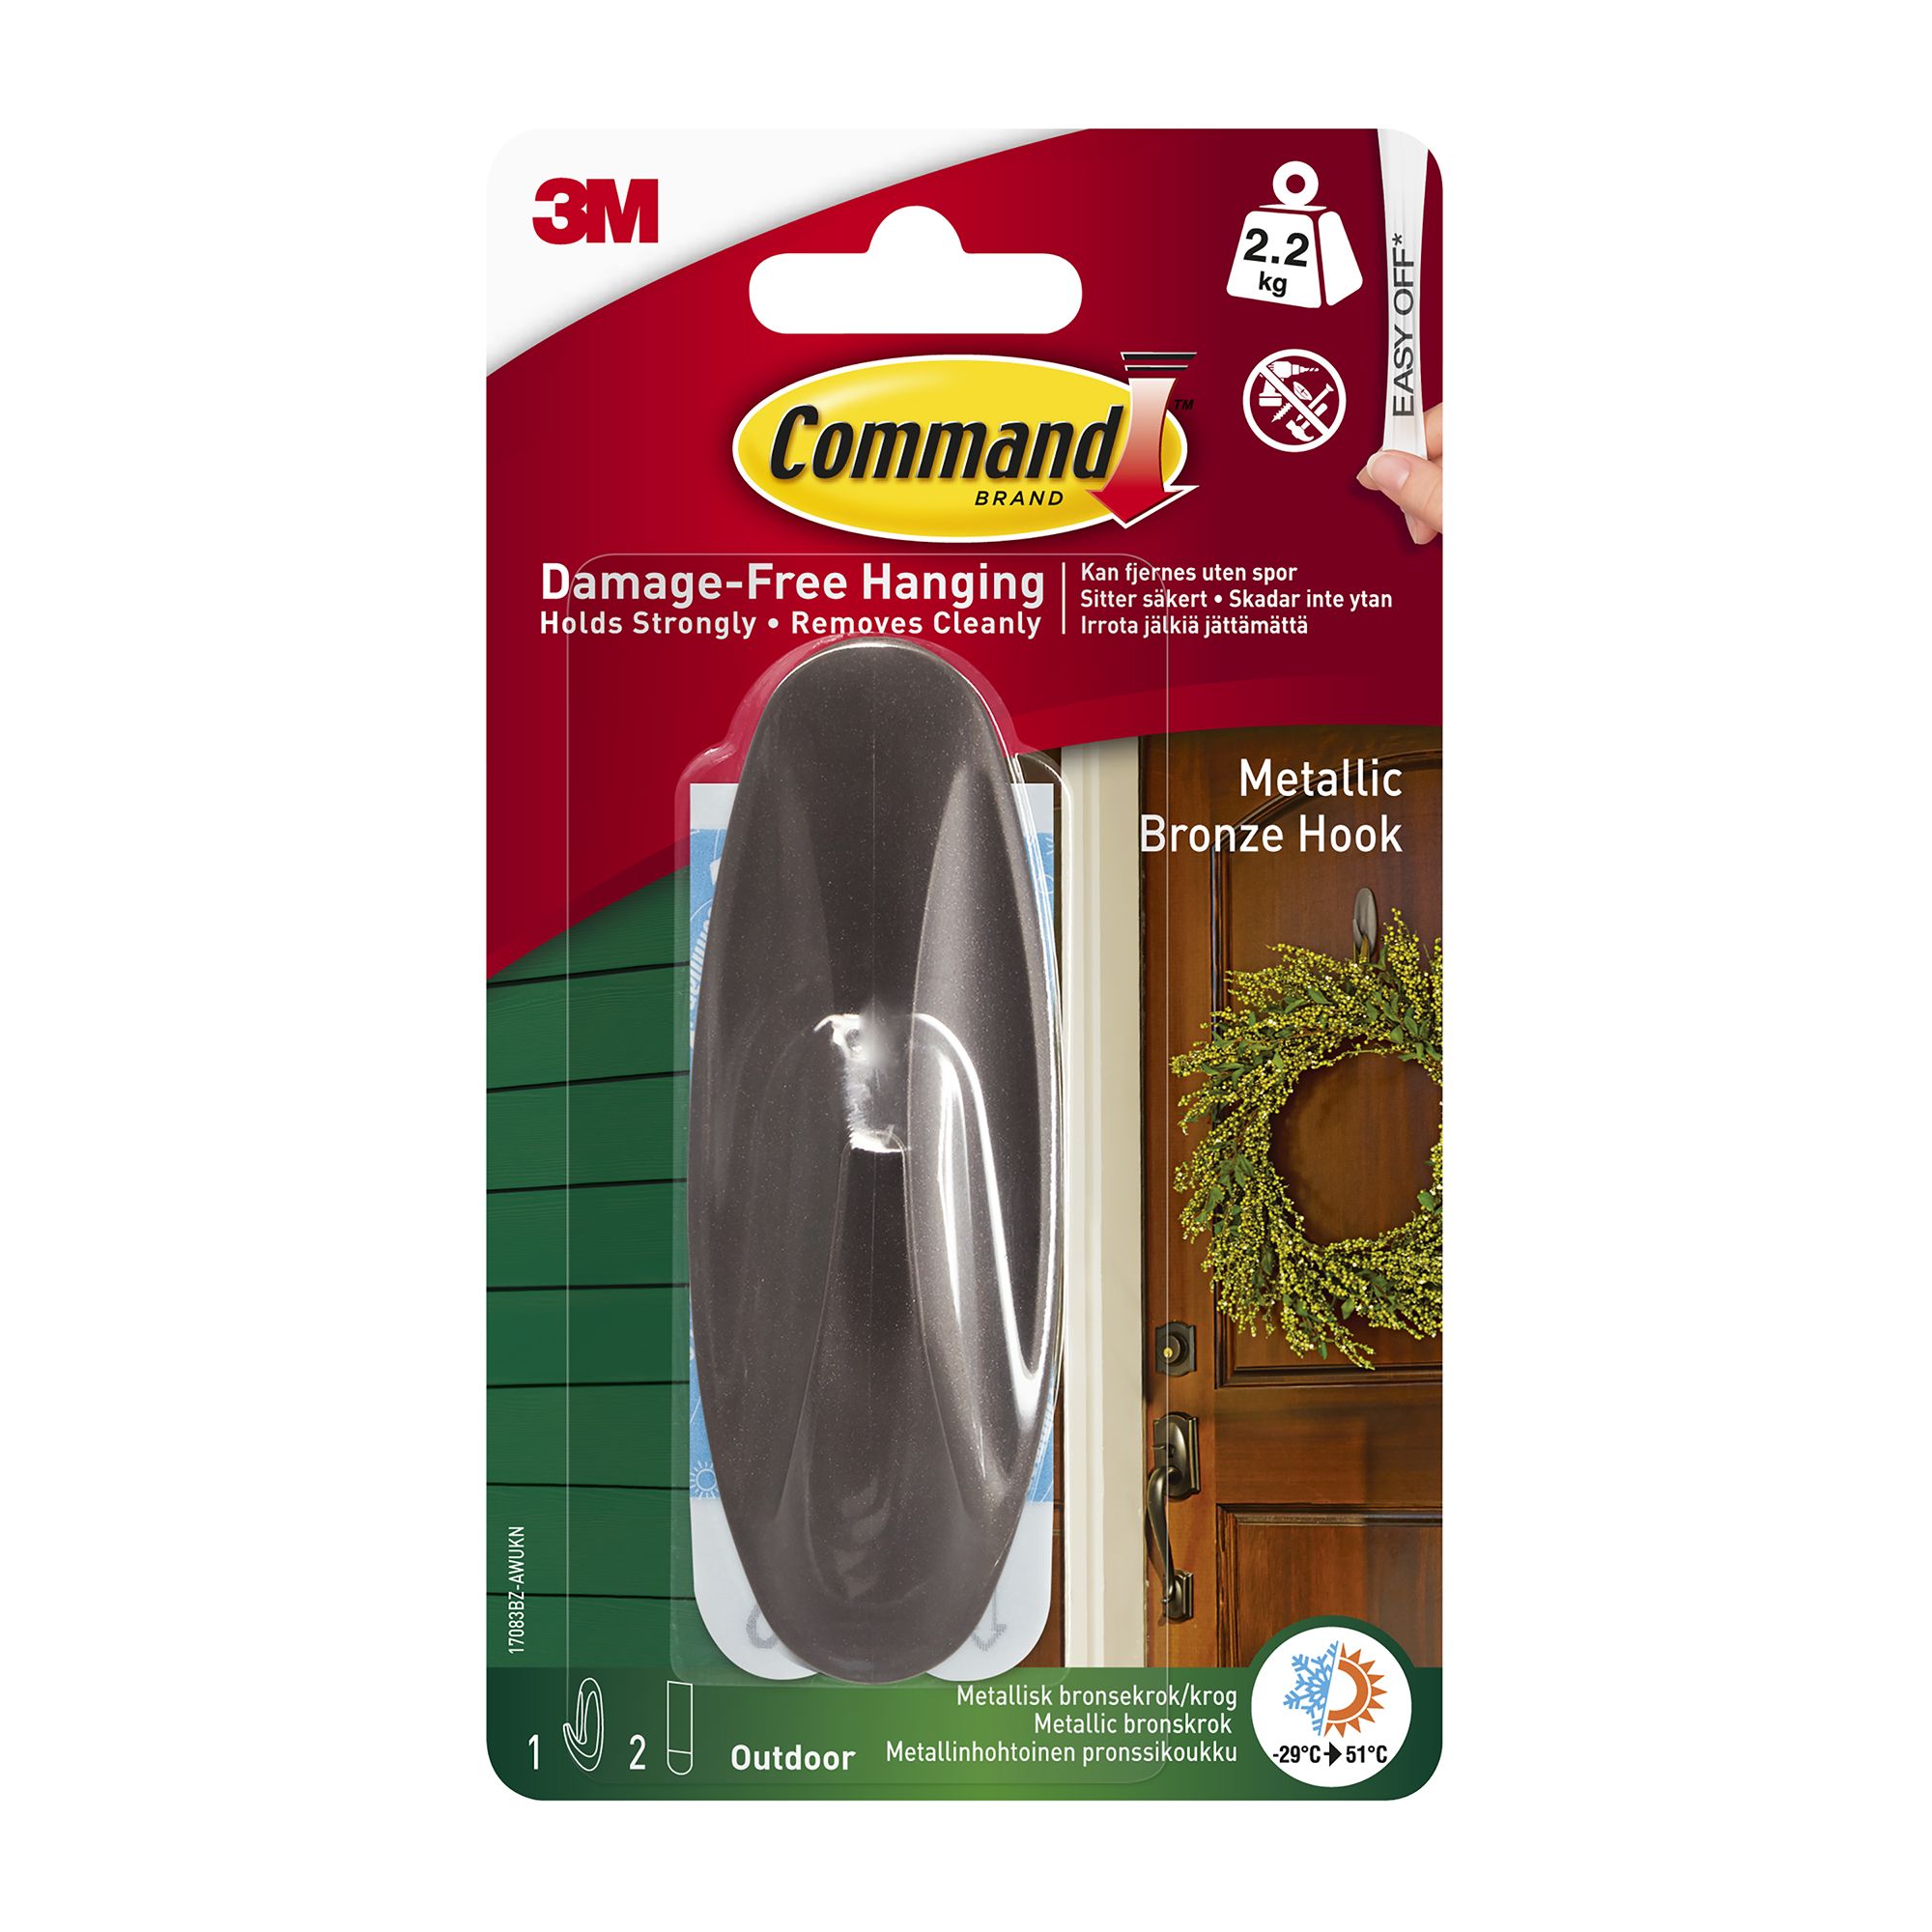 3M Command Strips X-Large Heavy Duty Hooks - Can They Hold Curtain Rods? 